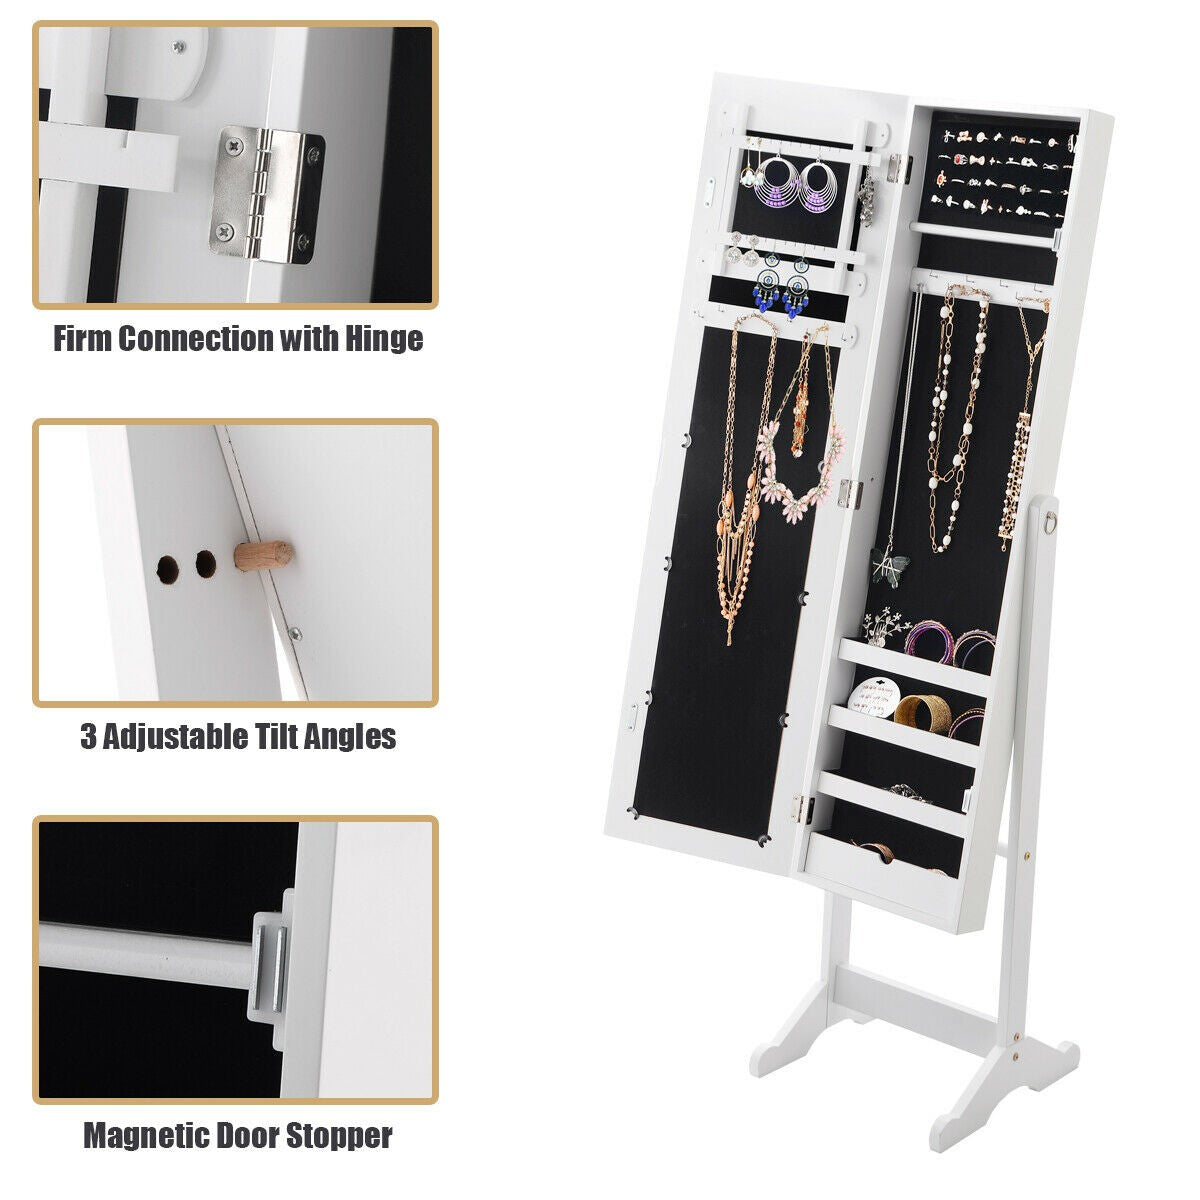 Mirrored Standing Jewelry Cabinet Storage Box - Scarvesnthangs